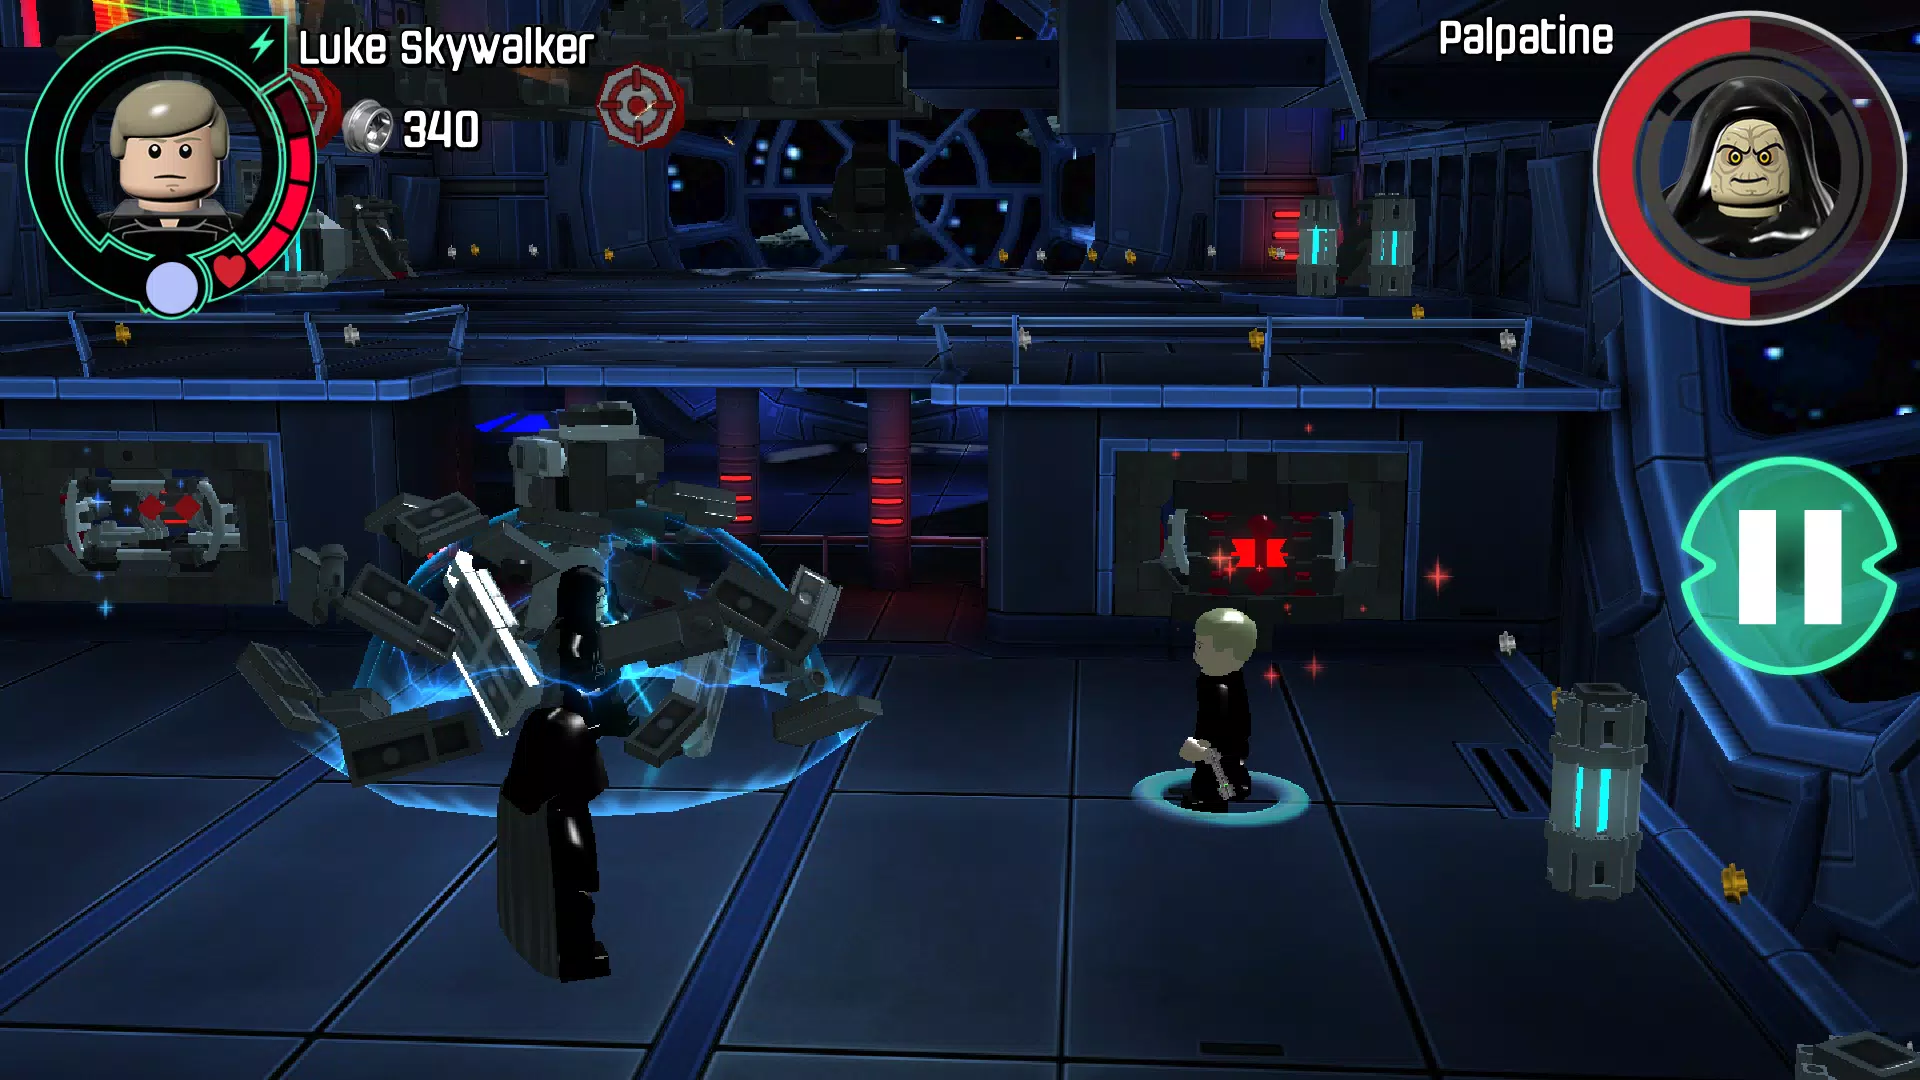 Amazing Game Lego Star Wars' The Force Awakens Android Full Offline No  password 